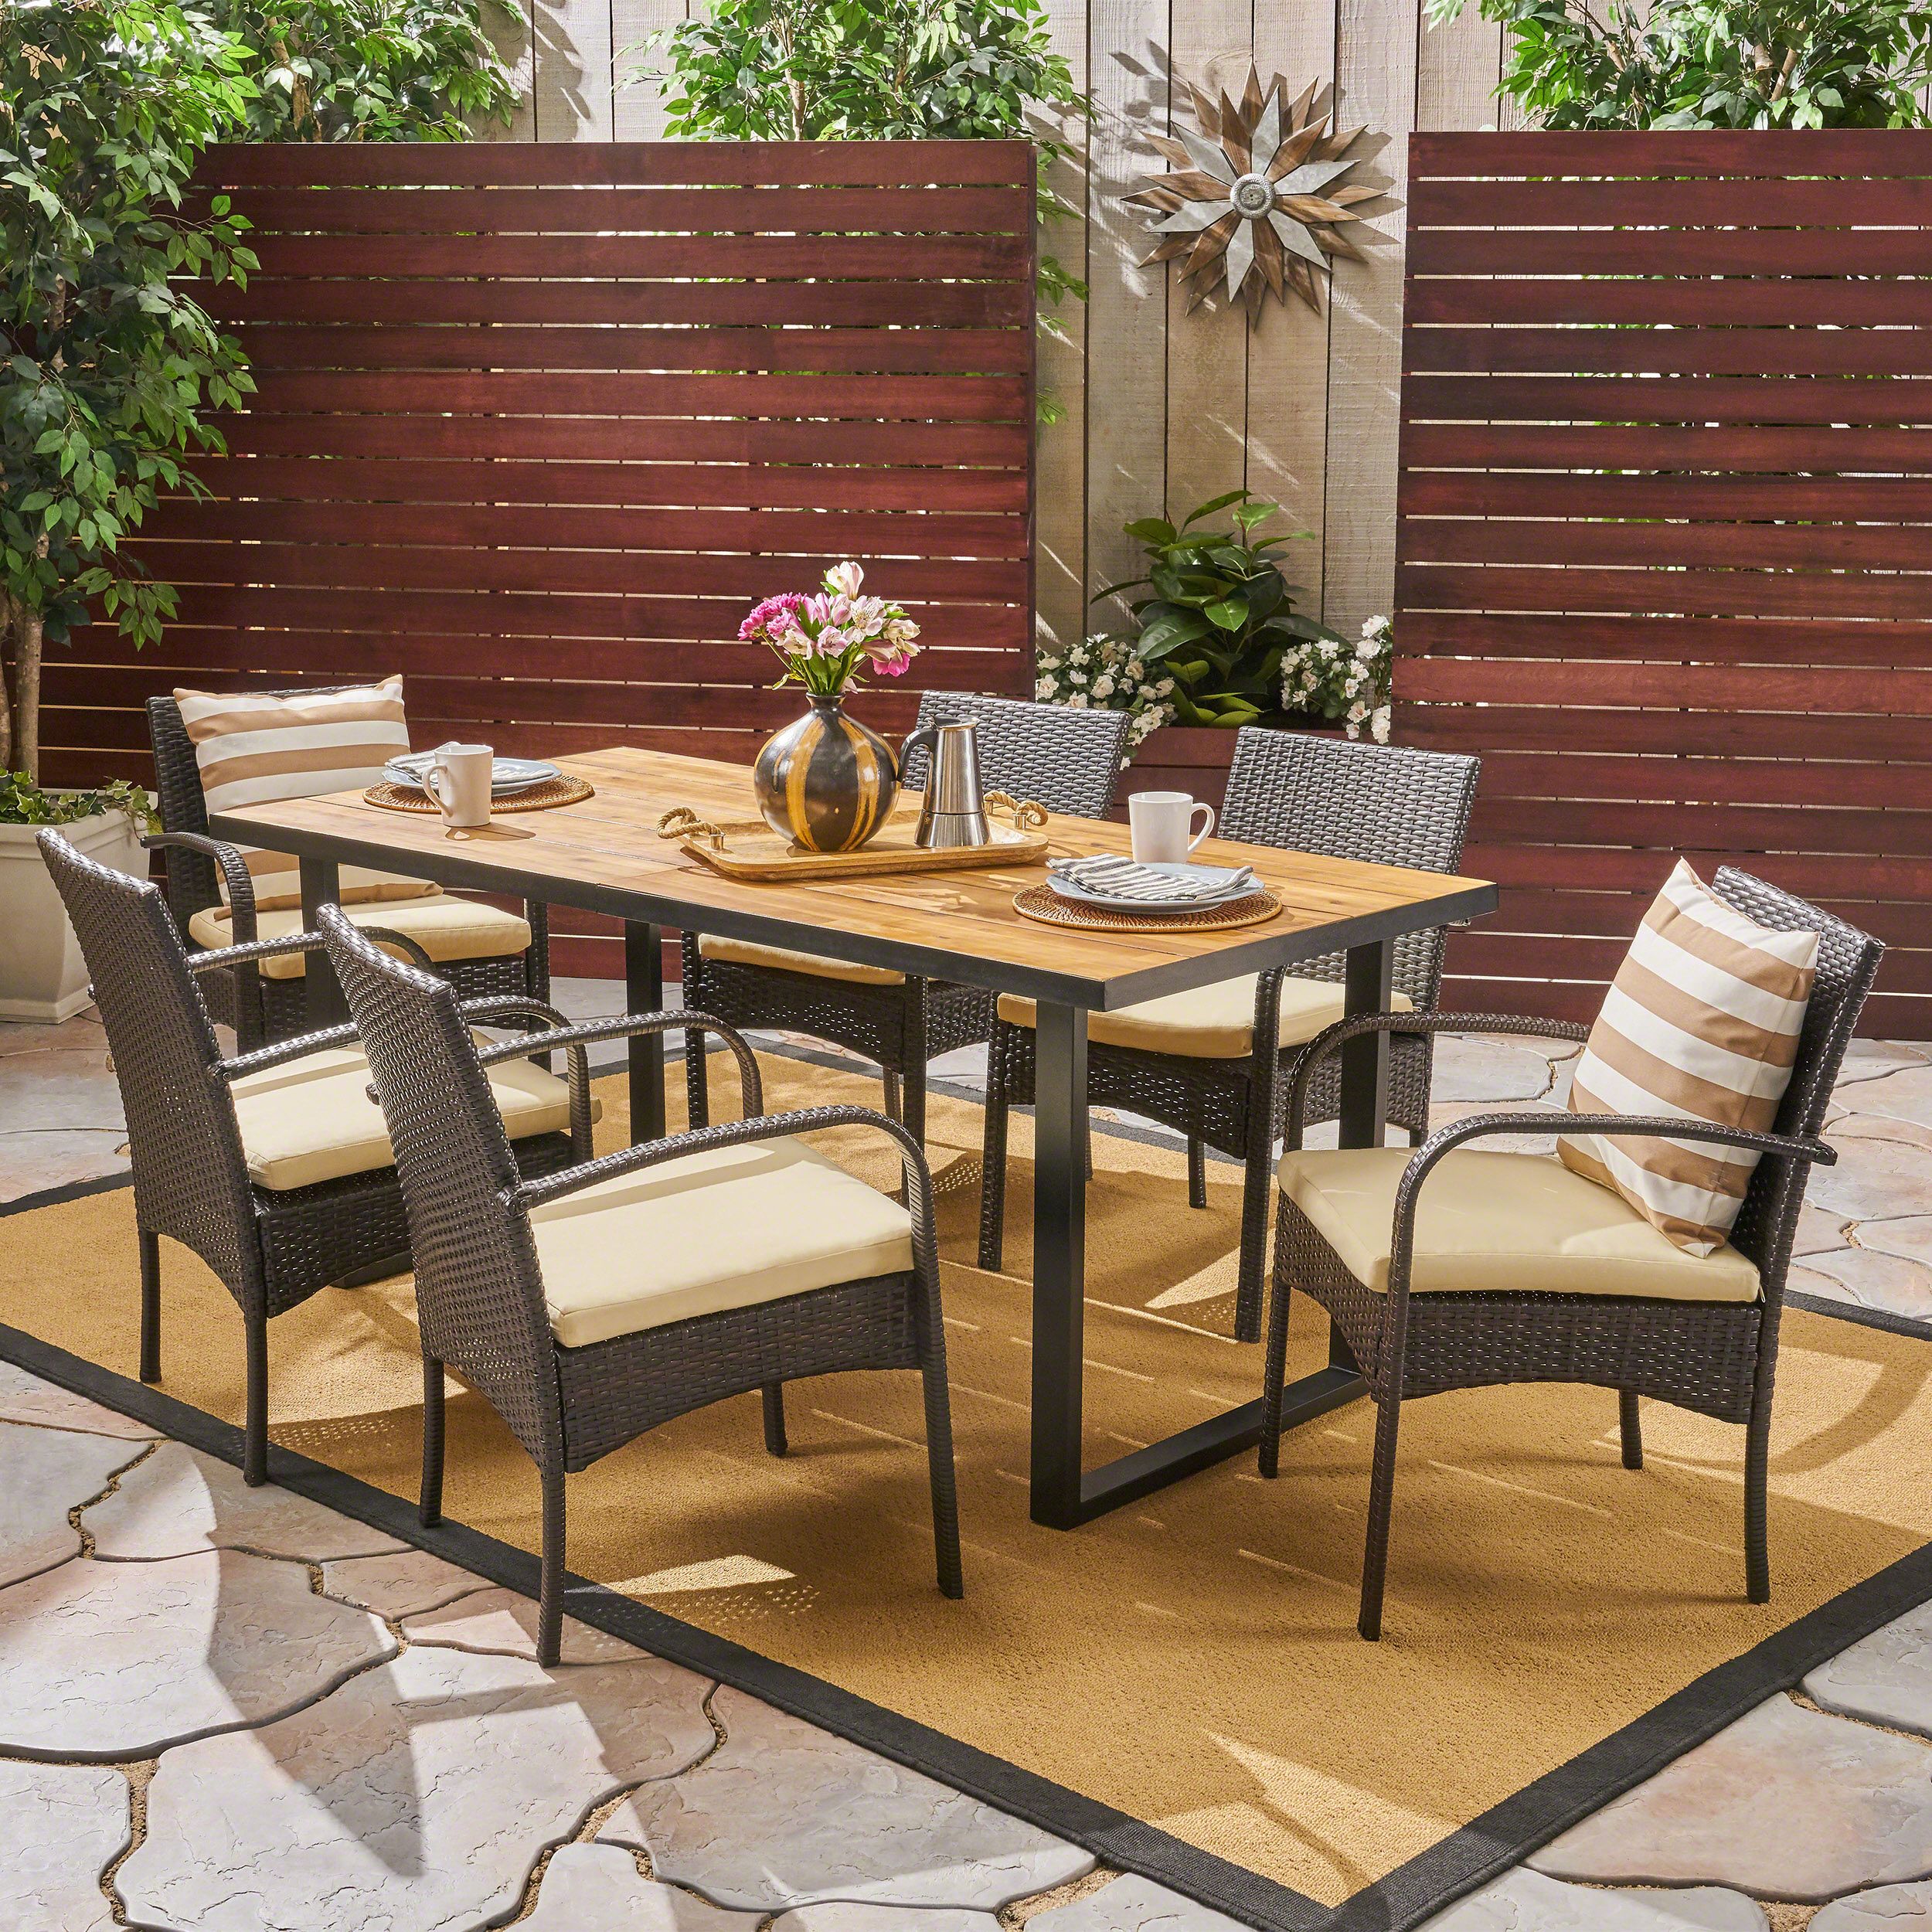 Juliet Outdoor 7 Piece Acacia Wood And Wicker Rectangular Dining Set Intended For Brown Acacia Patio Dining Sets (View 3 of 15)